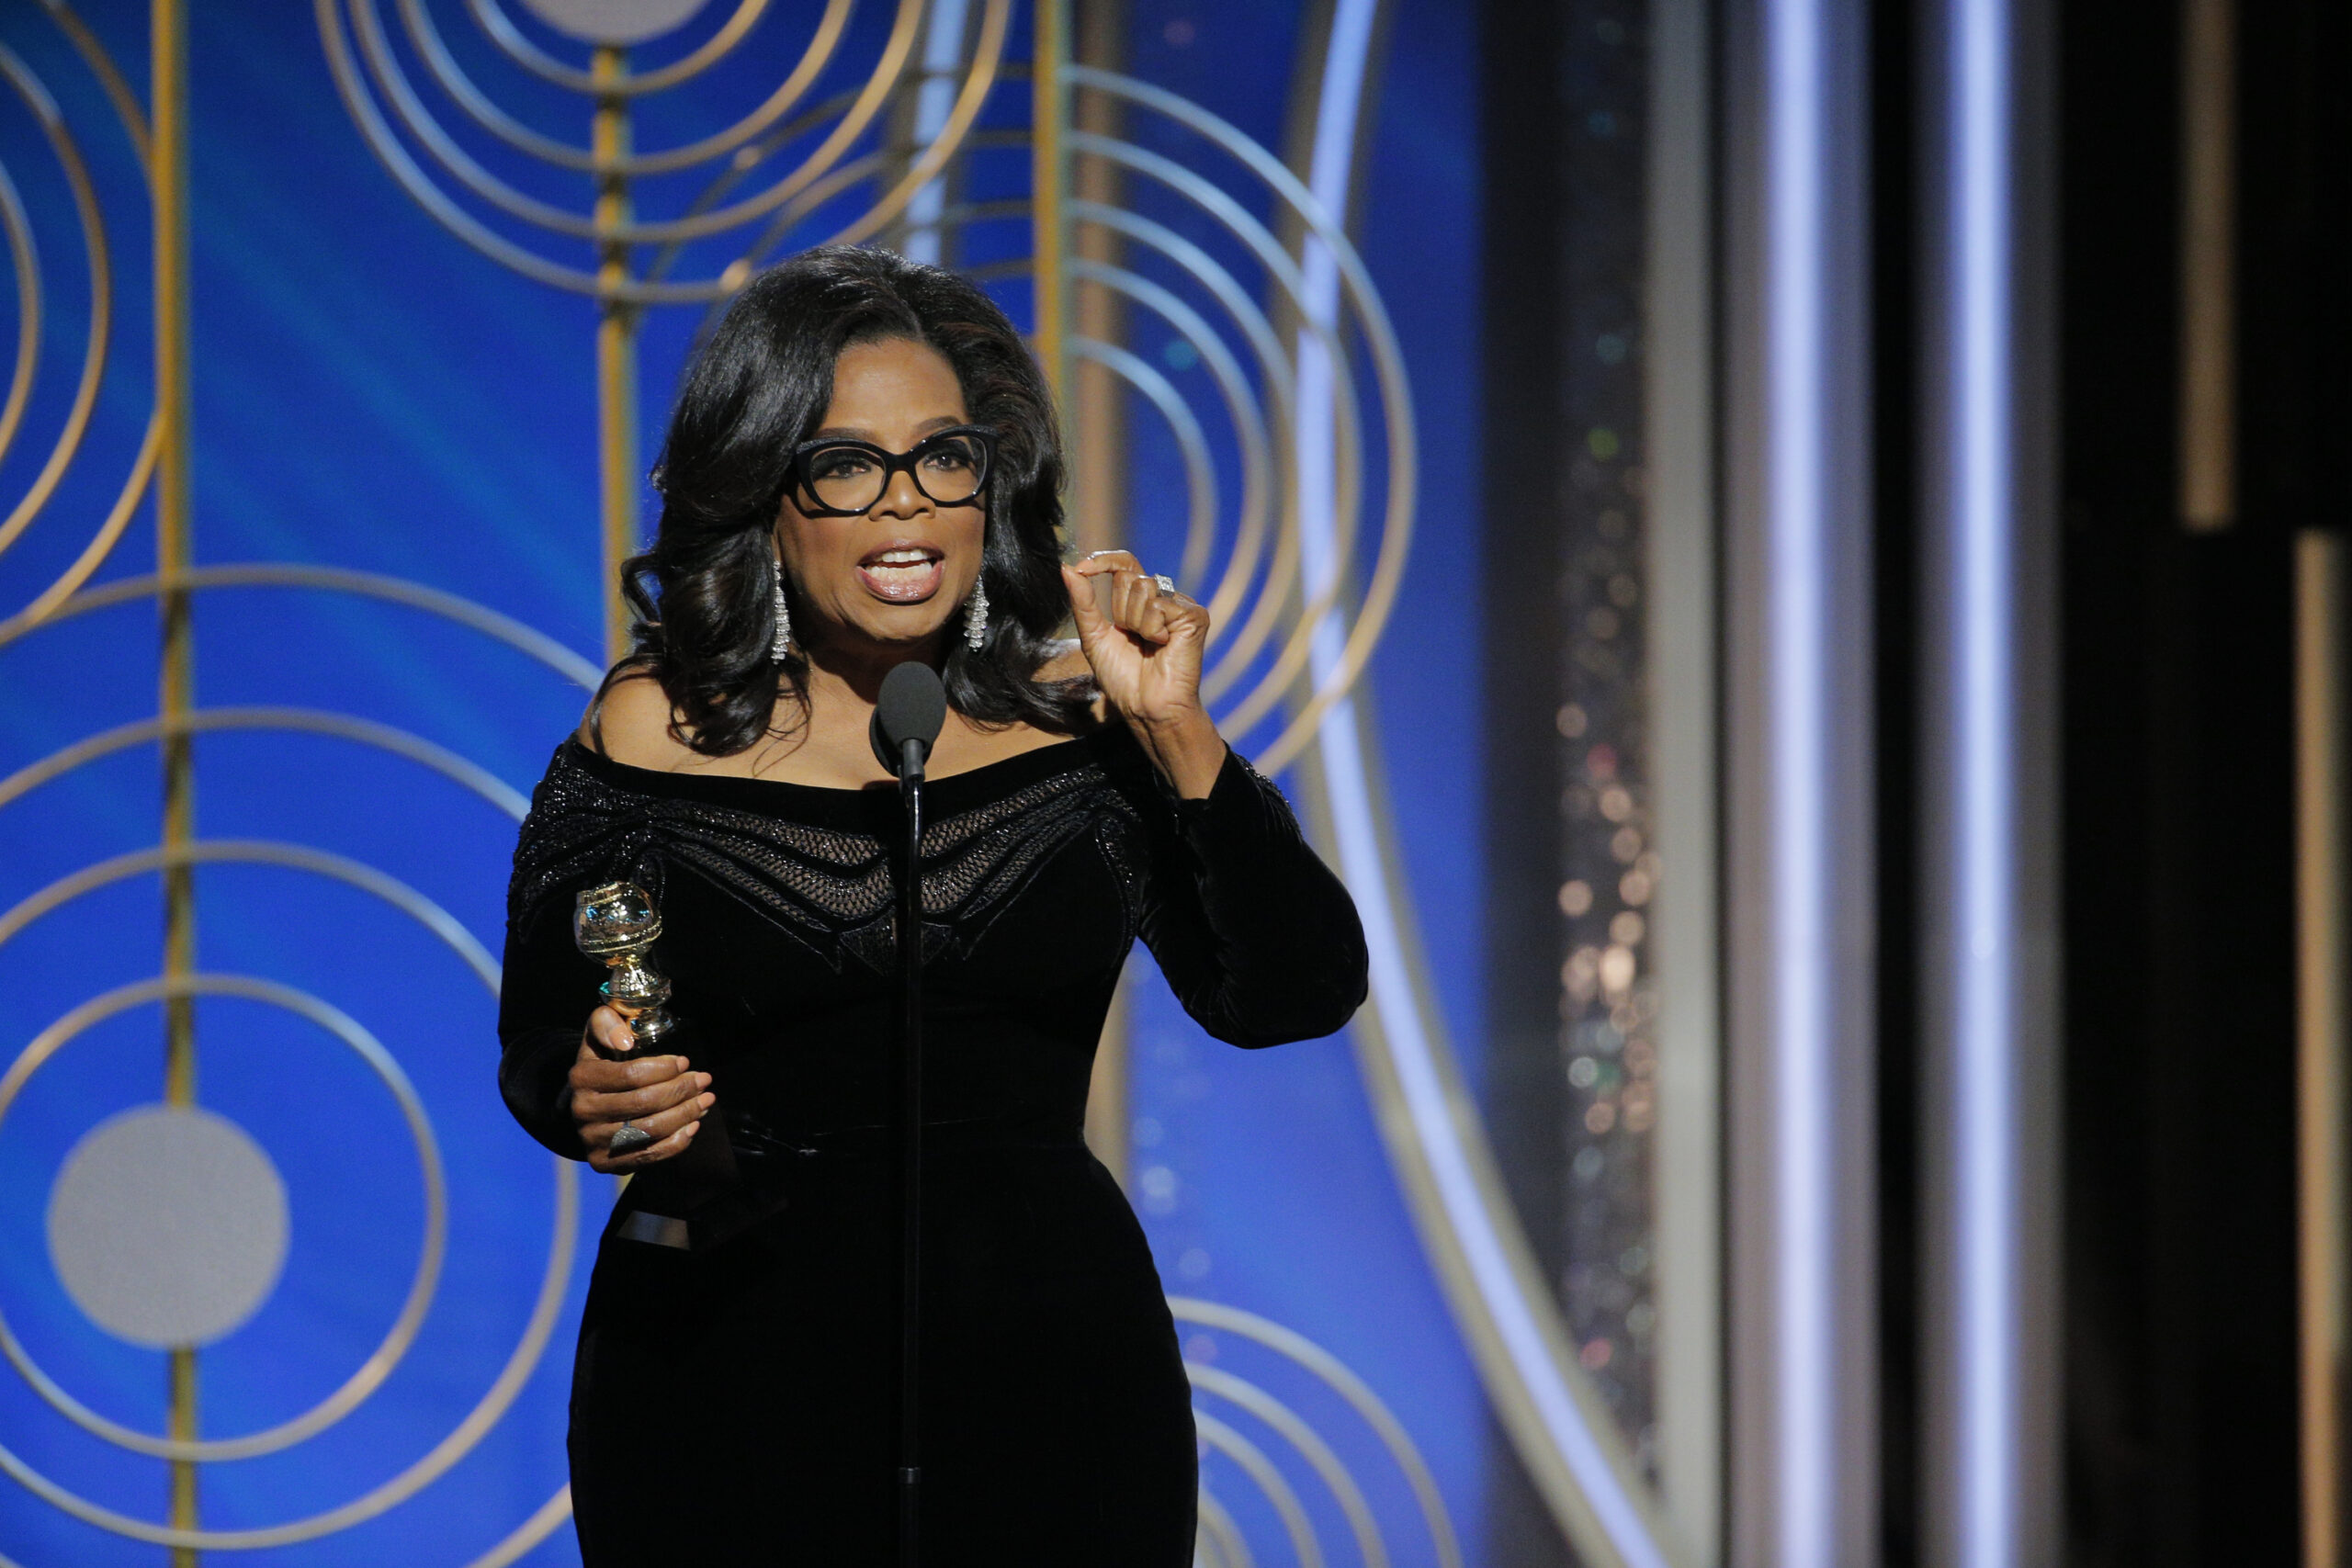 Oprah Winfrey Hits Back At Romney Claim That She Wanted To Run For President